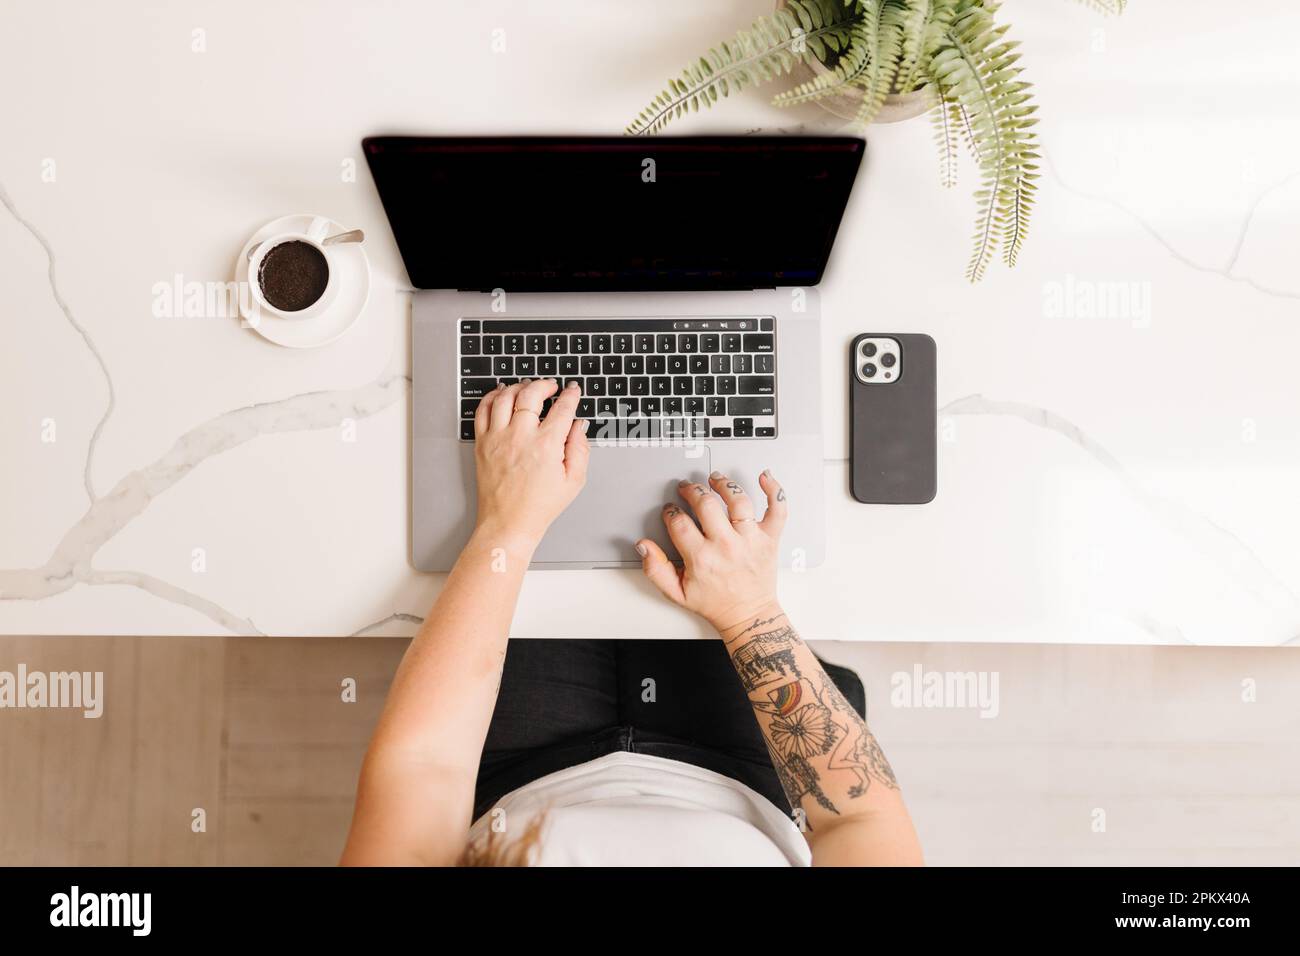 Tattooed arms typing on a computer with espresso and phone Stock Photo